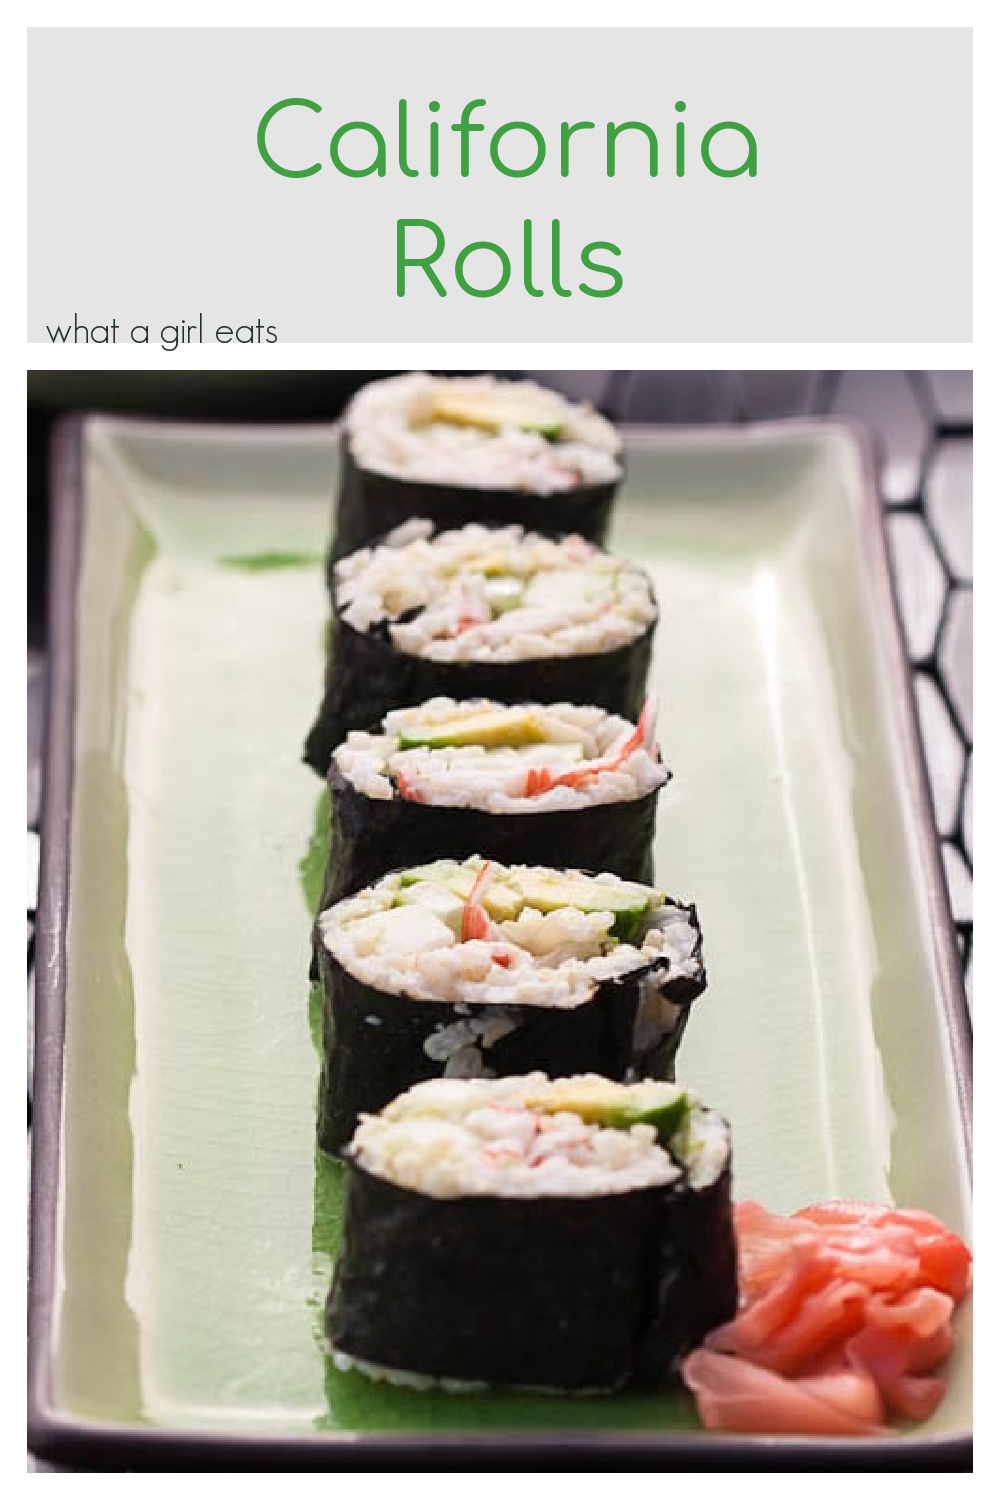 California rolls are a great introduction to sushi without raw fish. Get the recipe - so easy, an 11 year old can do it!